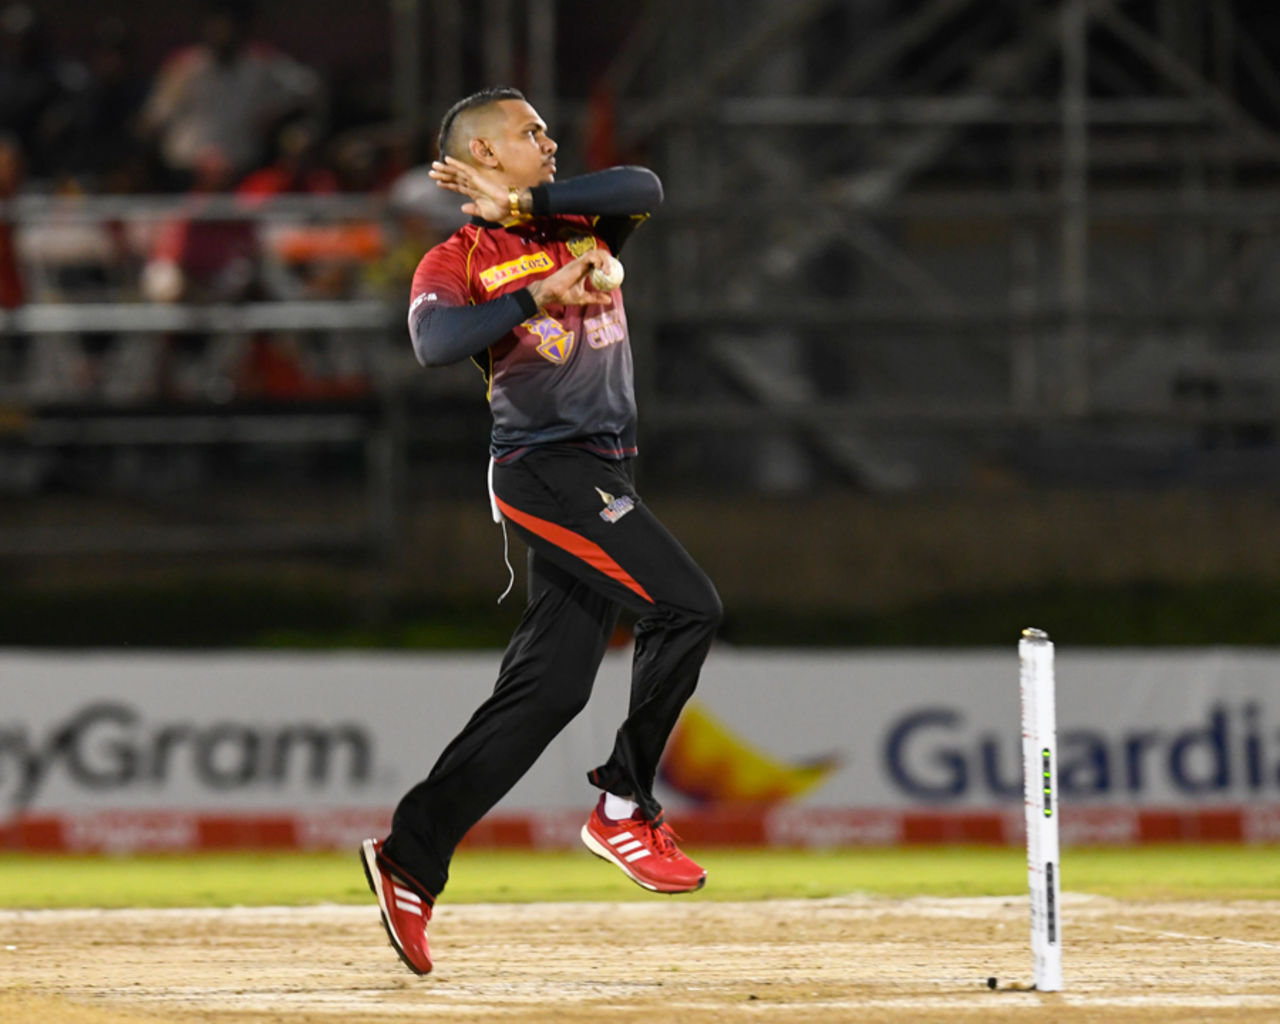 Sunil Narine in his bowling stride, Trinbago Knight Riders v St Kitts and Nevis Patriots, CPL 2017, Port of Spain, August 14, 2017